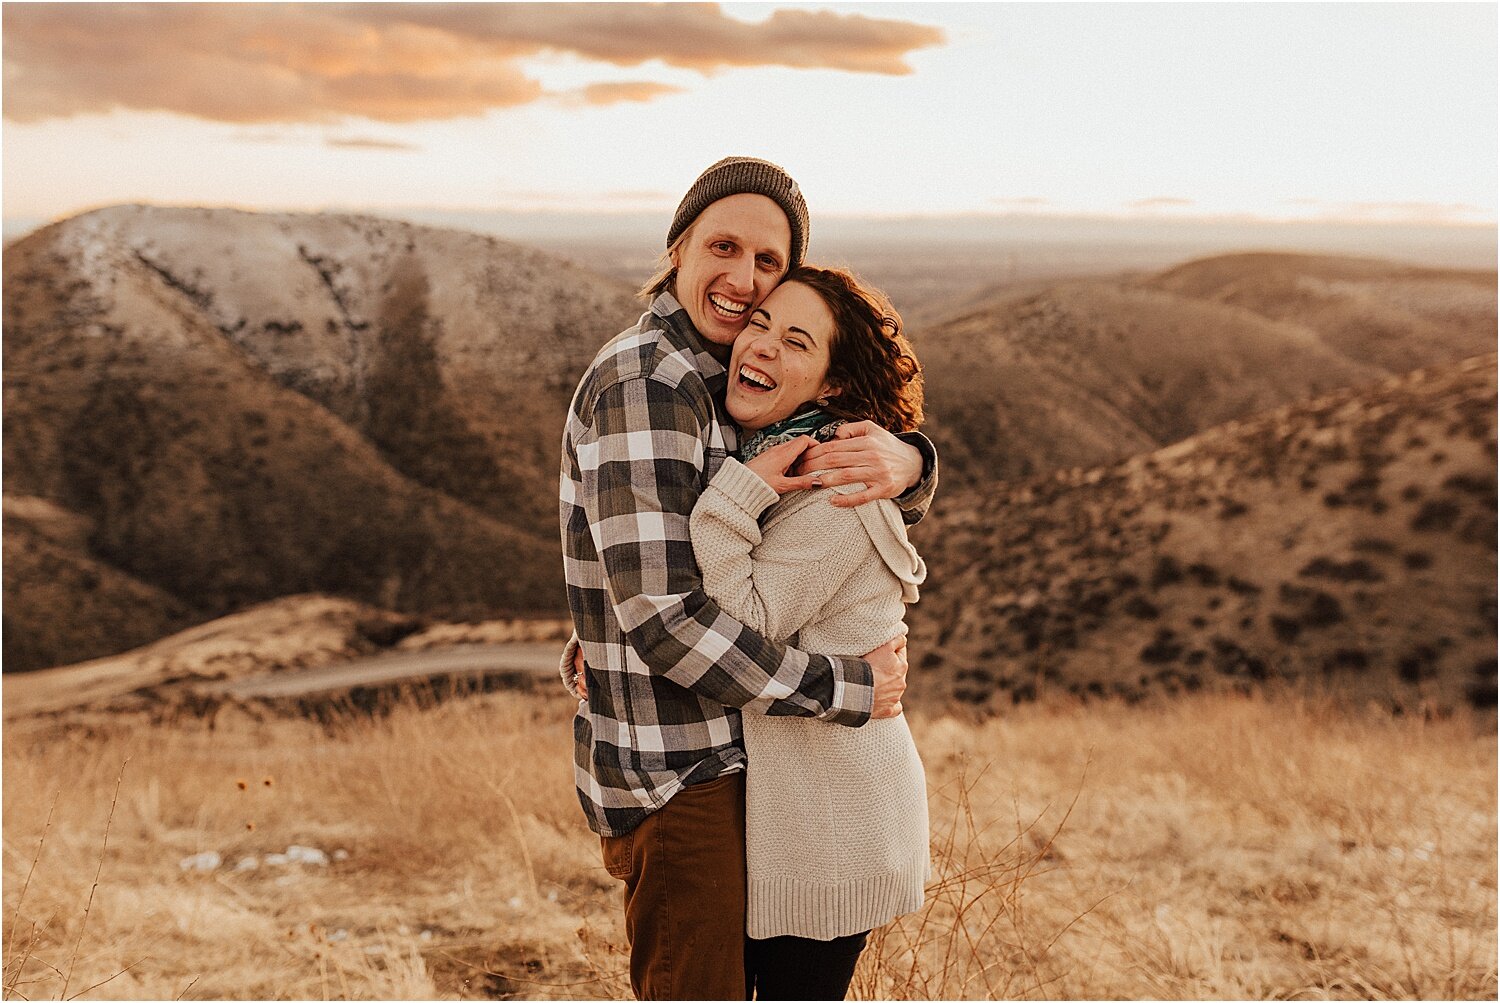 brewery foothills winter engagement session boise idaho28.jpg